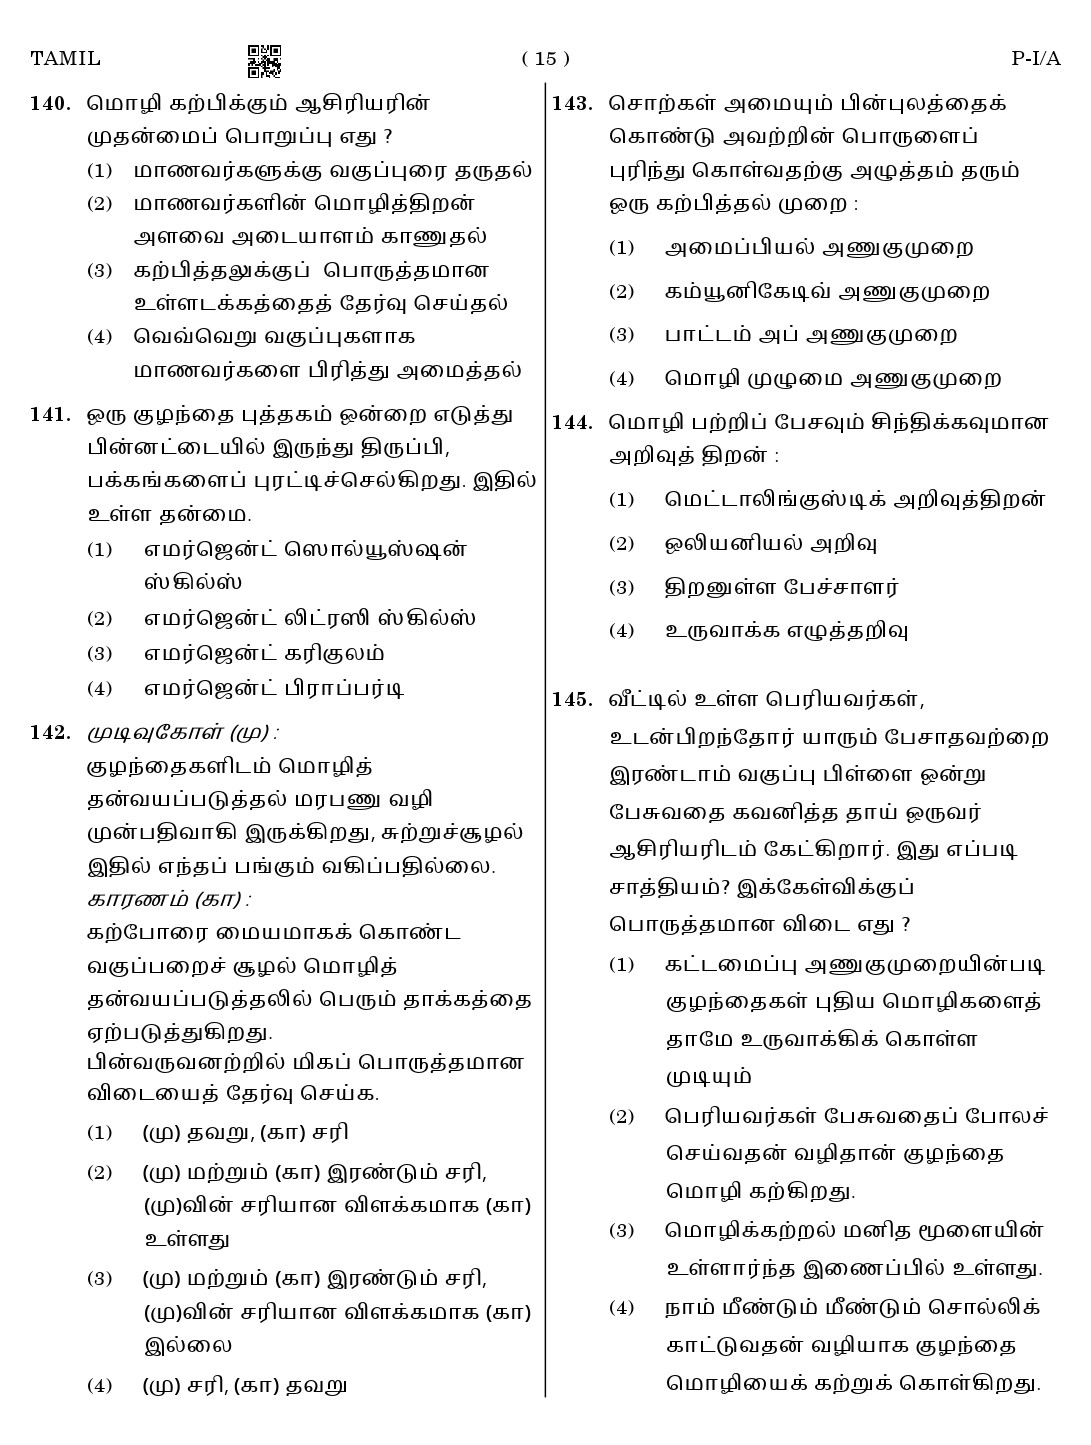 CTET August 2023 Tamil Paper 1 Part IV and V 15